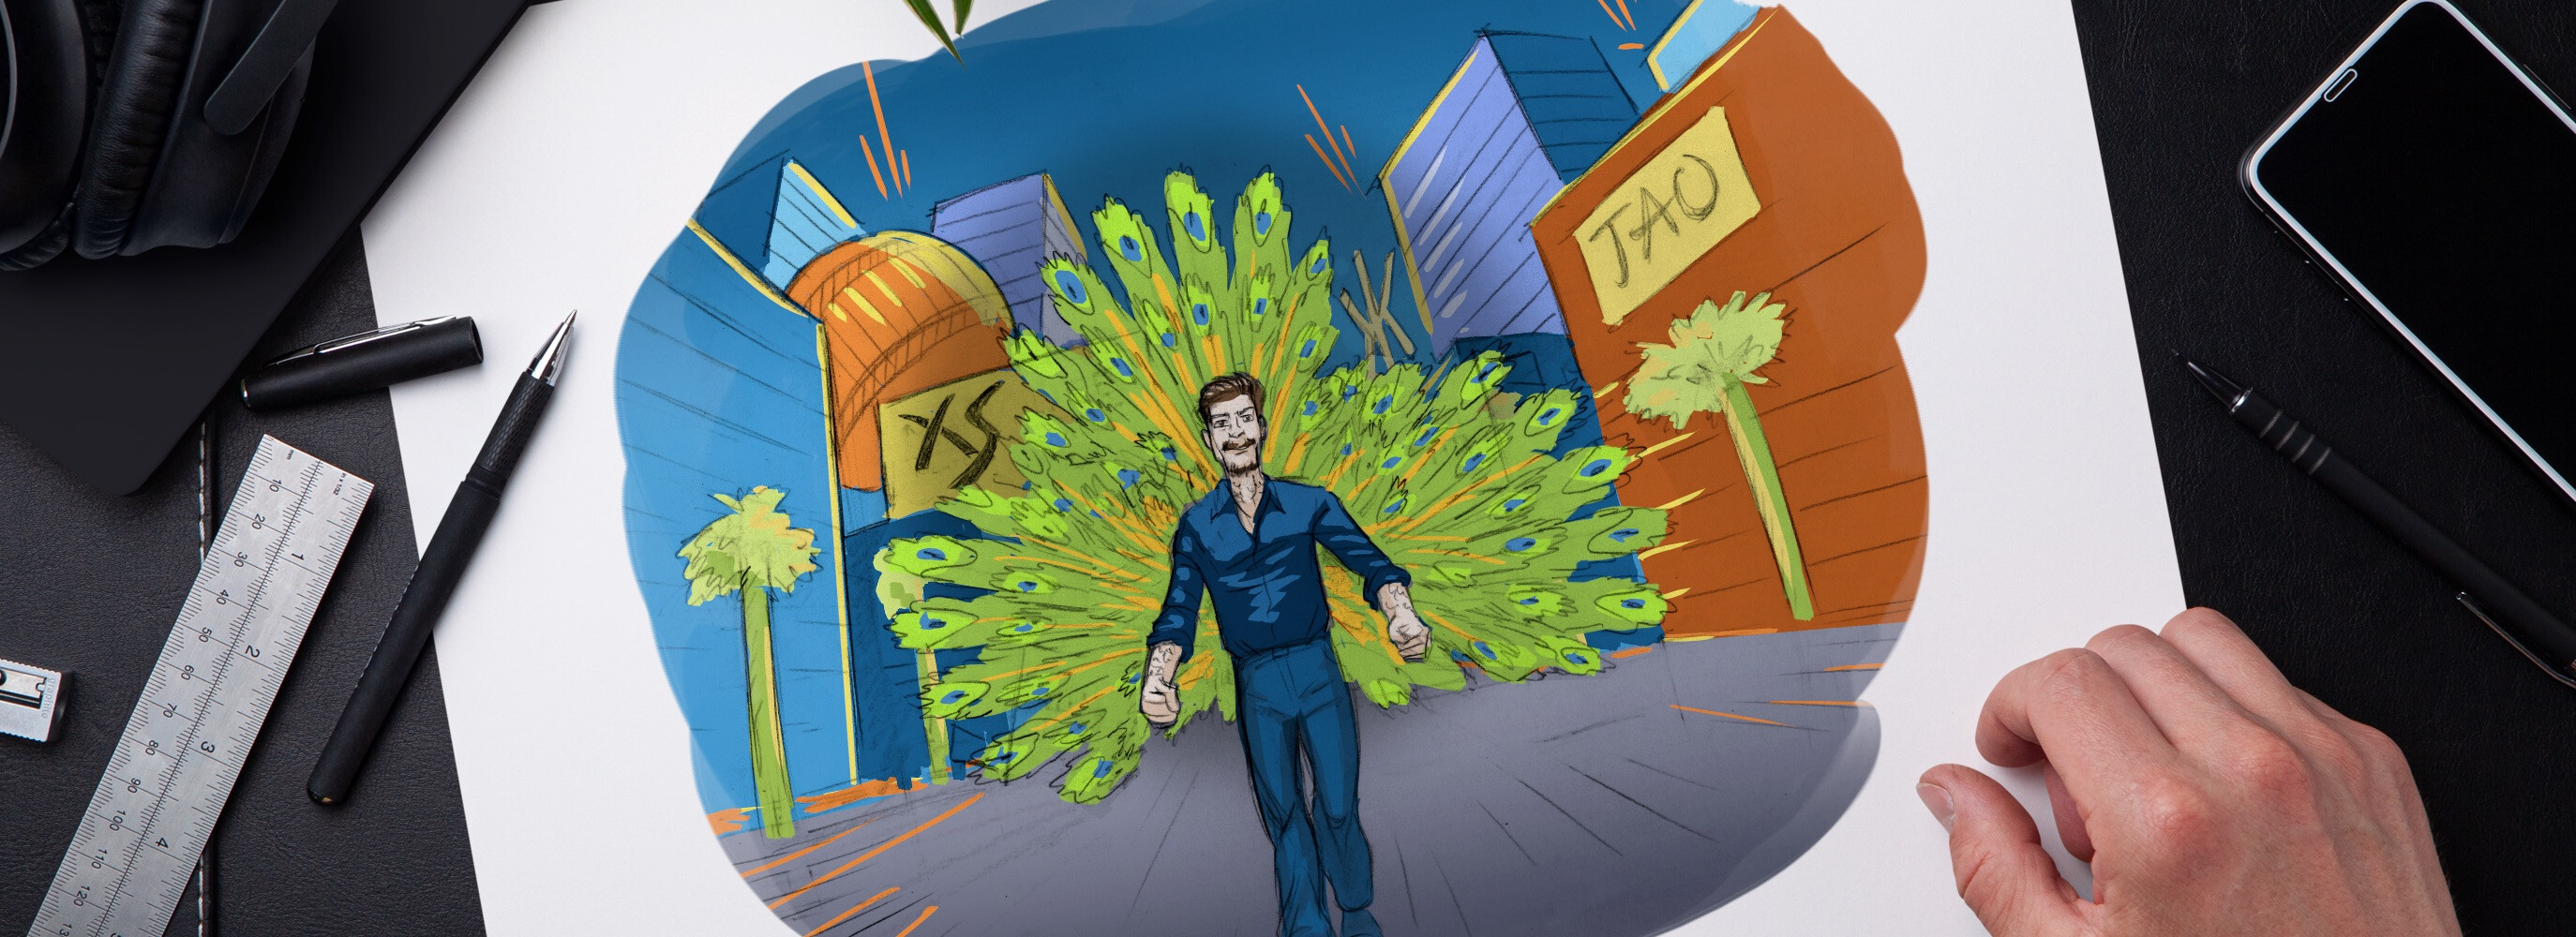 Sketch of "peacock" archetype for Patron, as a man walking down a Las Vegas street with peacock feathers behind him.